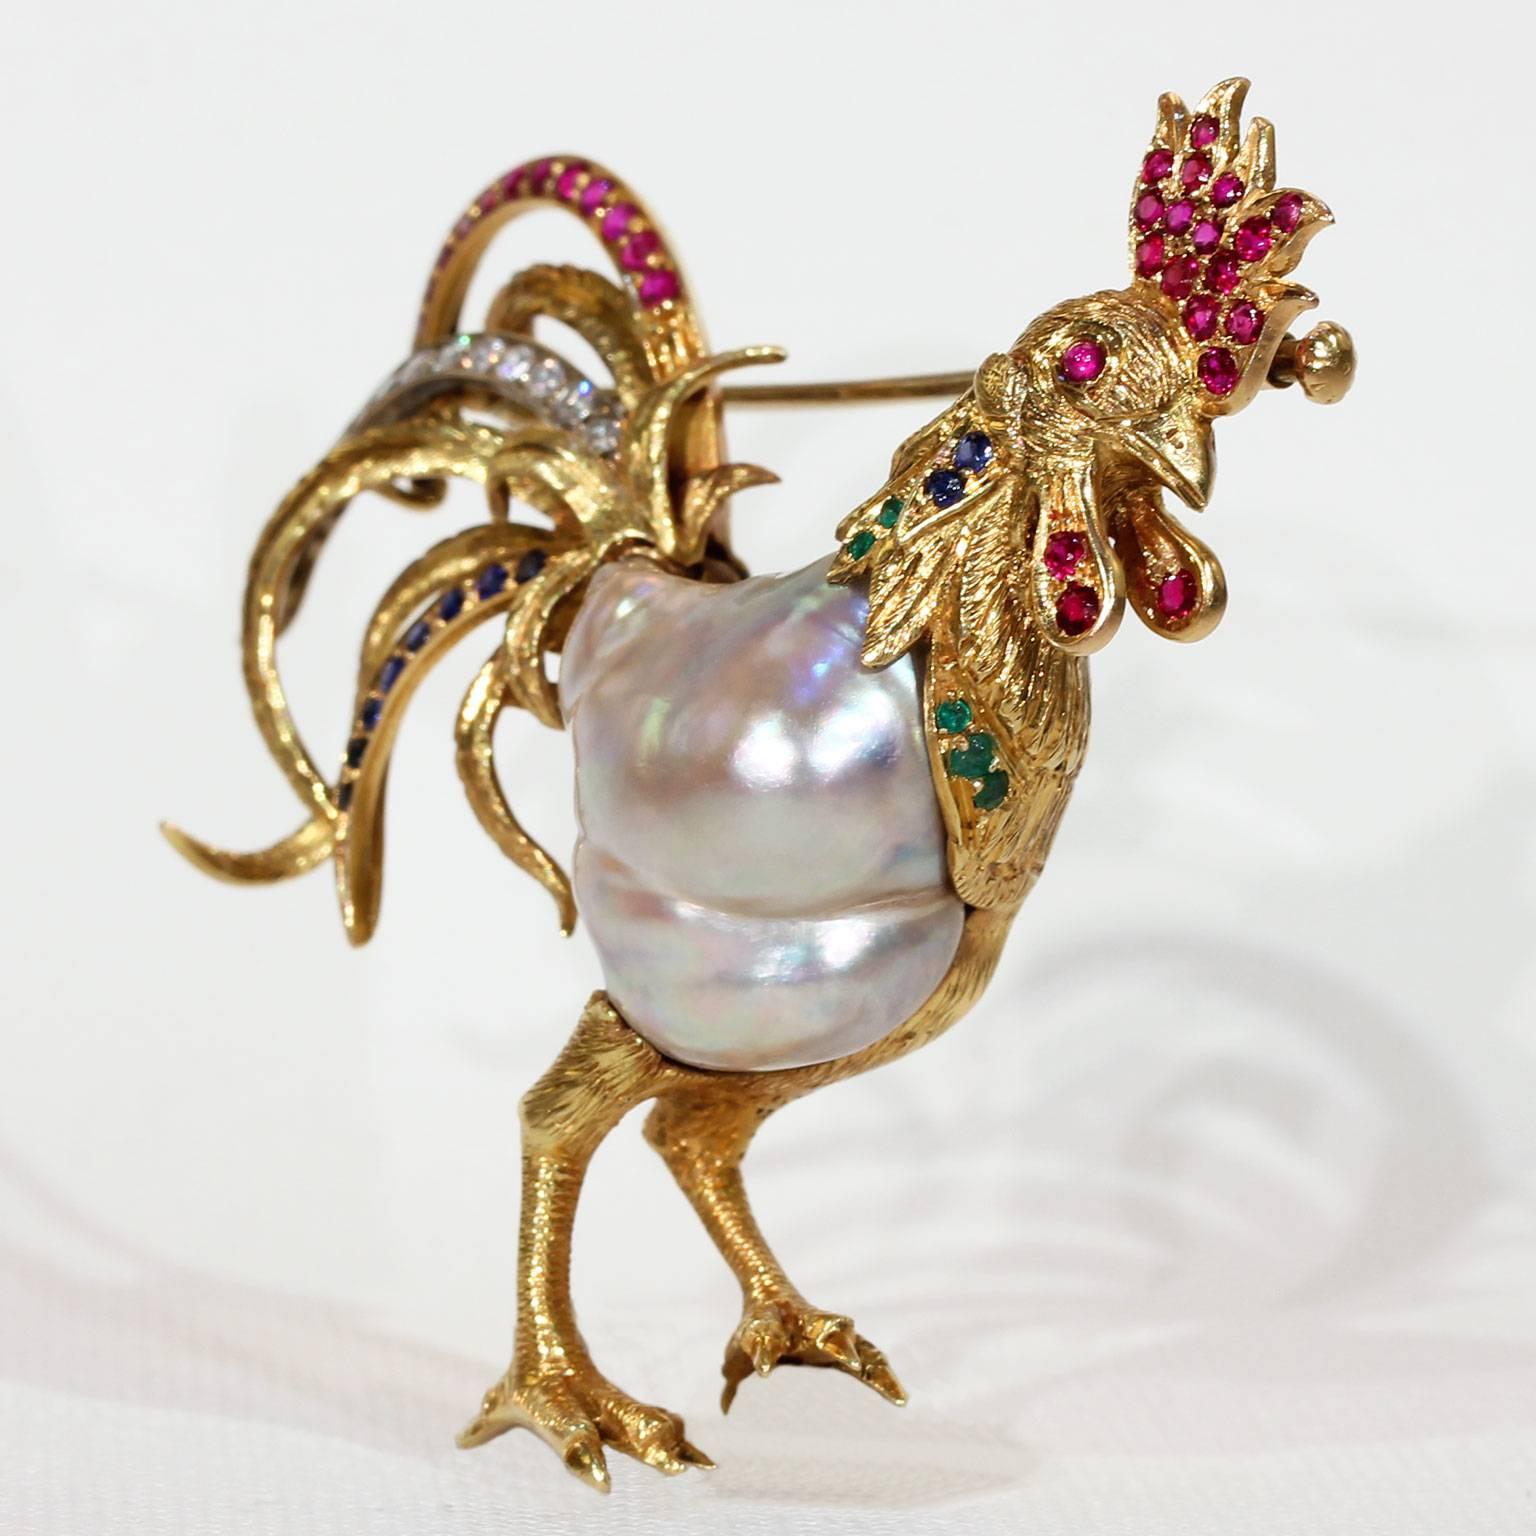 Here is a wonderful and cheeky rooster who is beautifully hand crafted. The body of the bird is created from a large, natural, Baroque Pearl. His tail is set with a spray of rubies, diamonds and sapphires; and his head is further set with rubies,